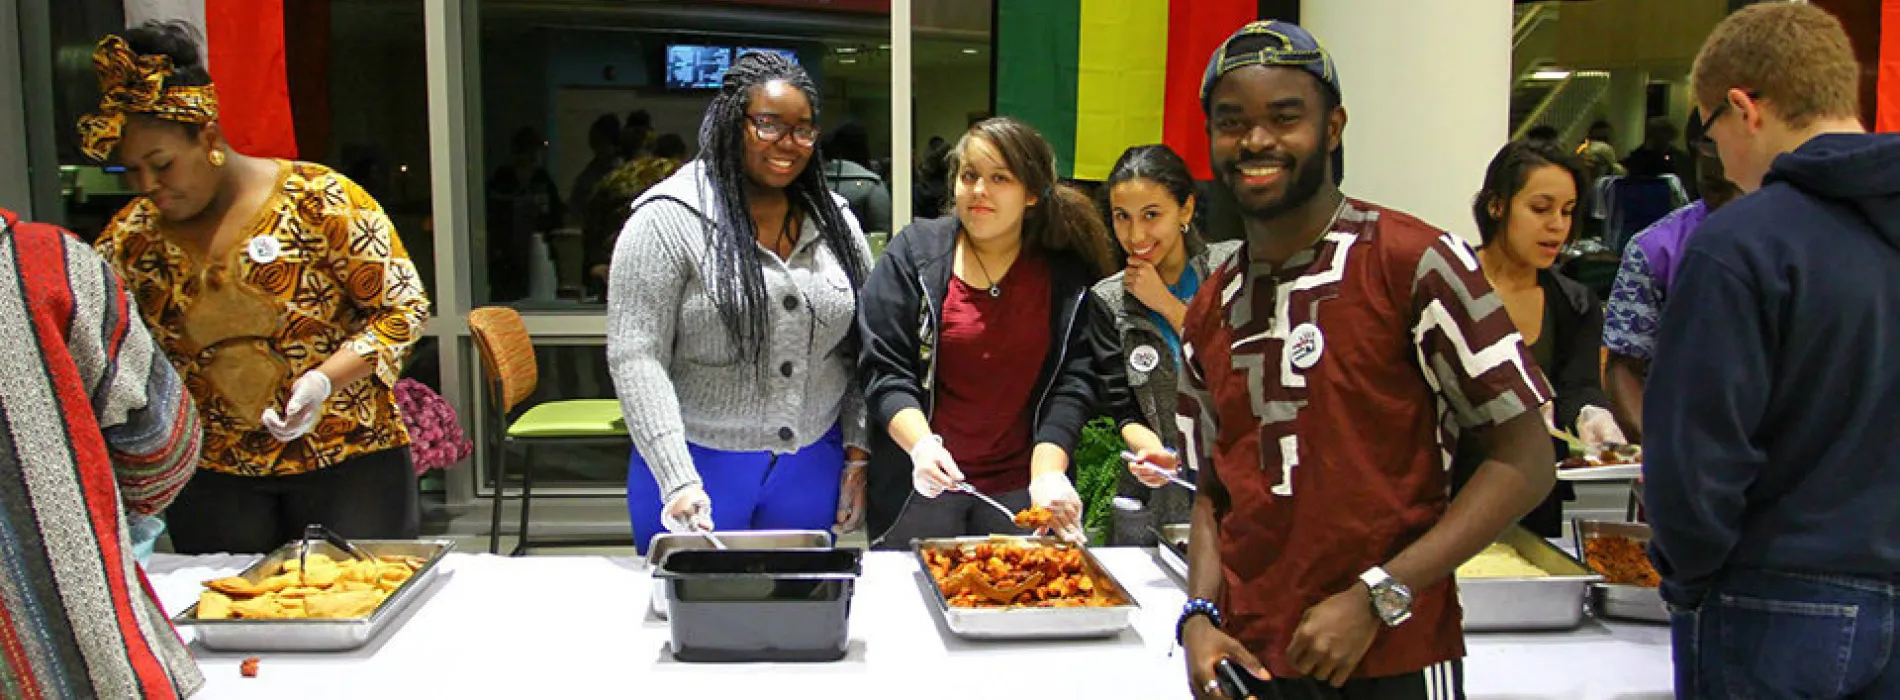 students serving food at a buffet line